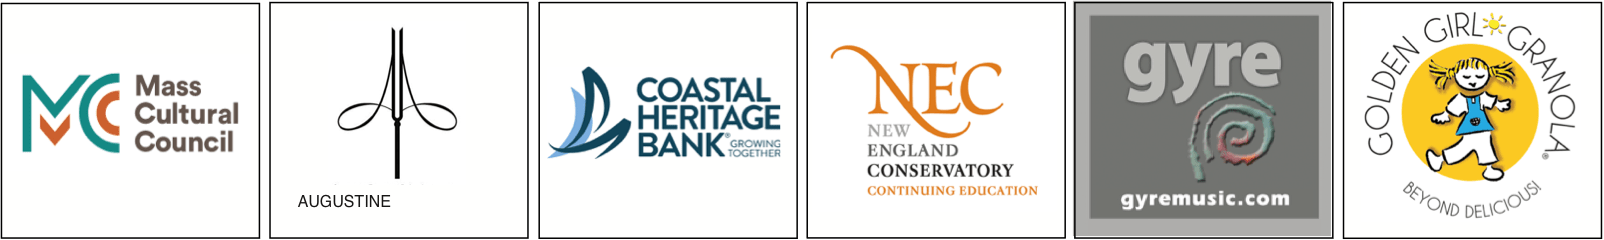 BCGS Sponsors include Massachusetts Cultural Council; Augustine Strings; Coastal Heritage Bank; New England Conservatory; Gyre Music; and Golden Girl Granola